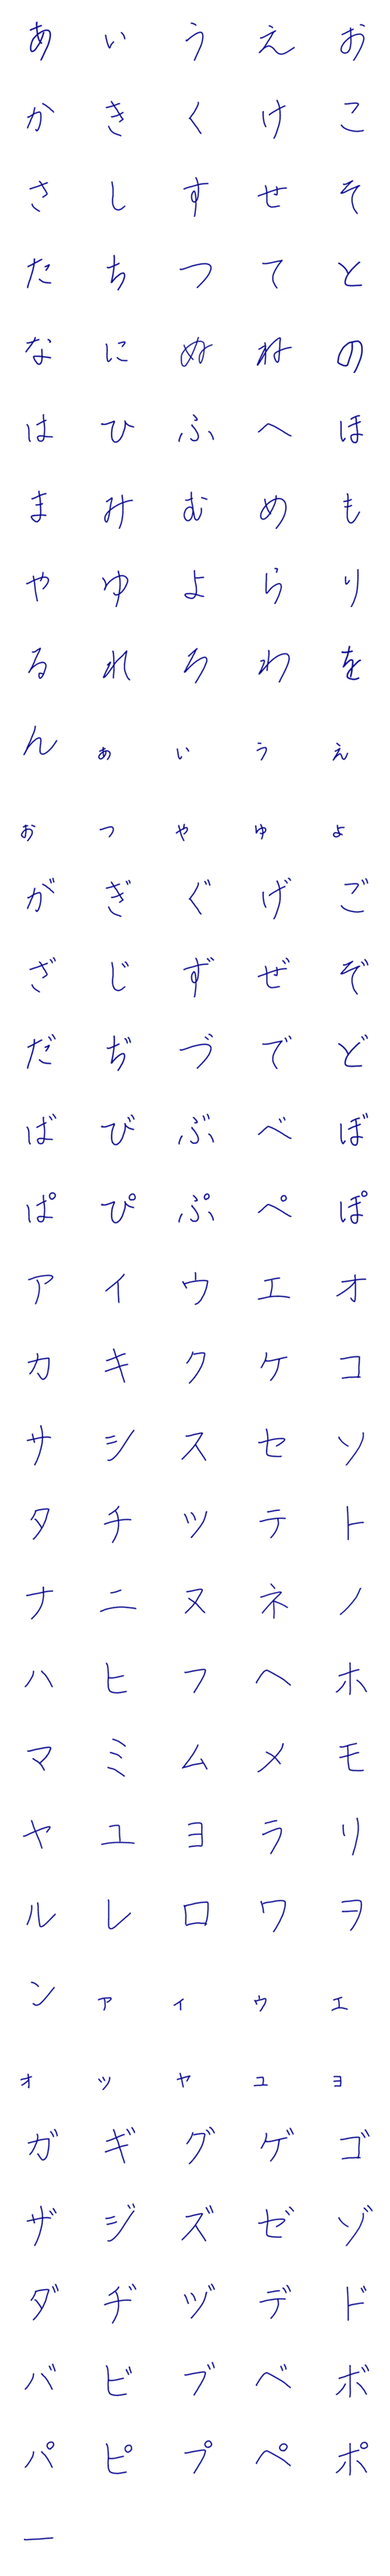 [LINE絵文字]達筆な文字の画像一覧